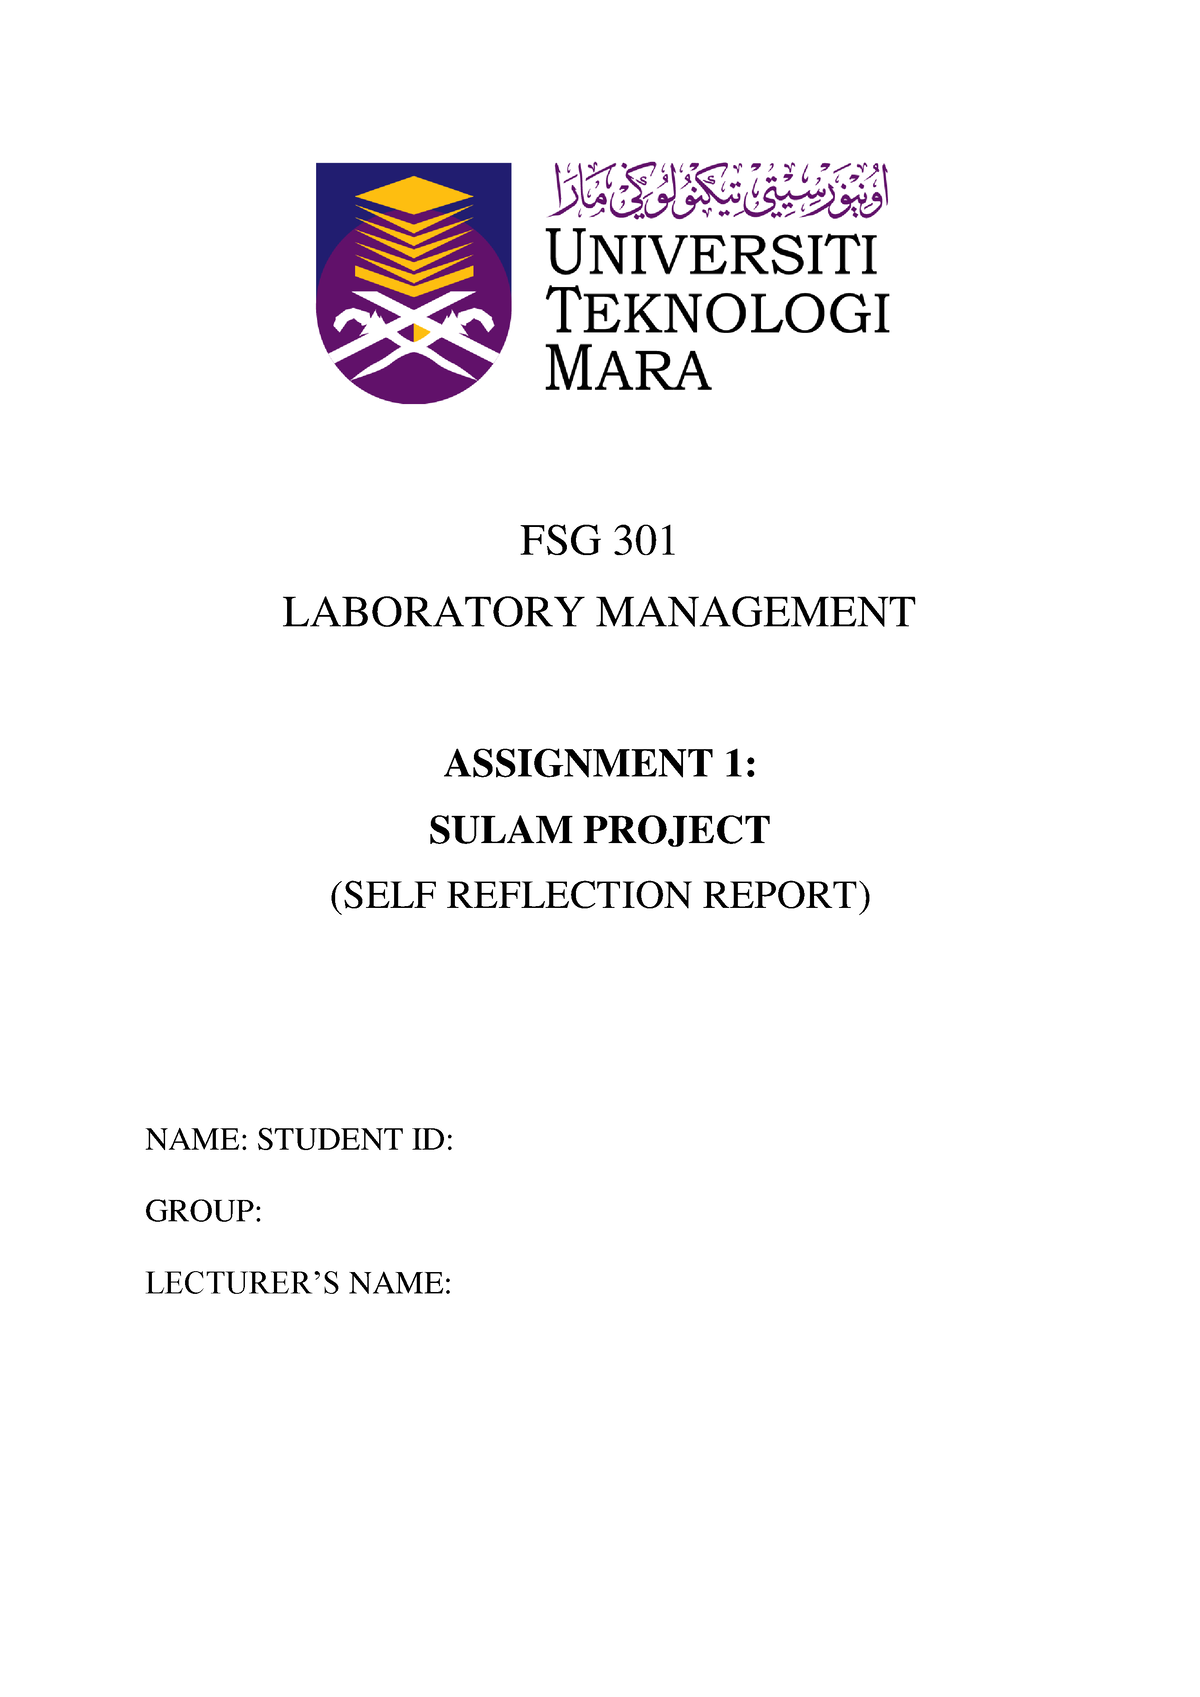 Assignment Report Sulam about covid 19 FSG 301 - applied science - UiTM